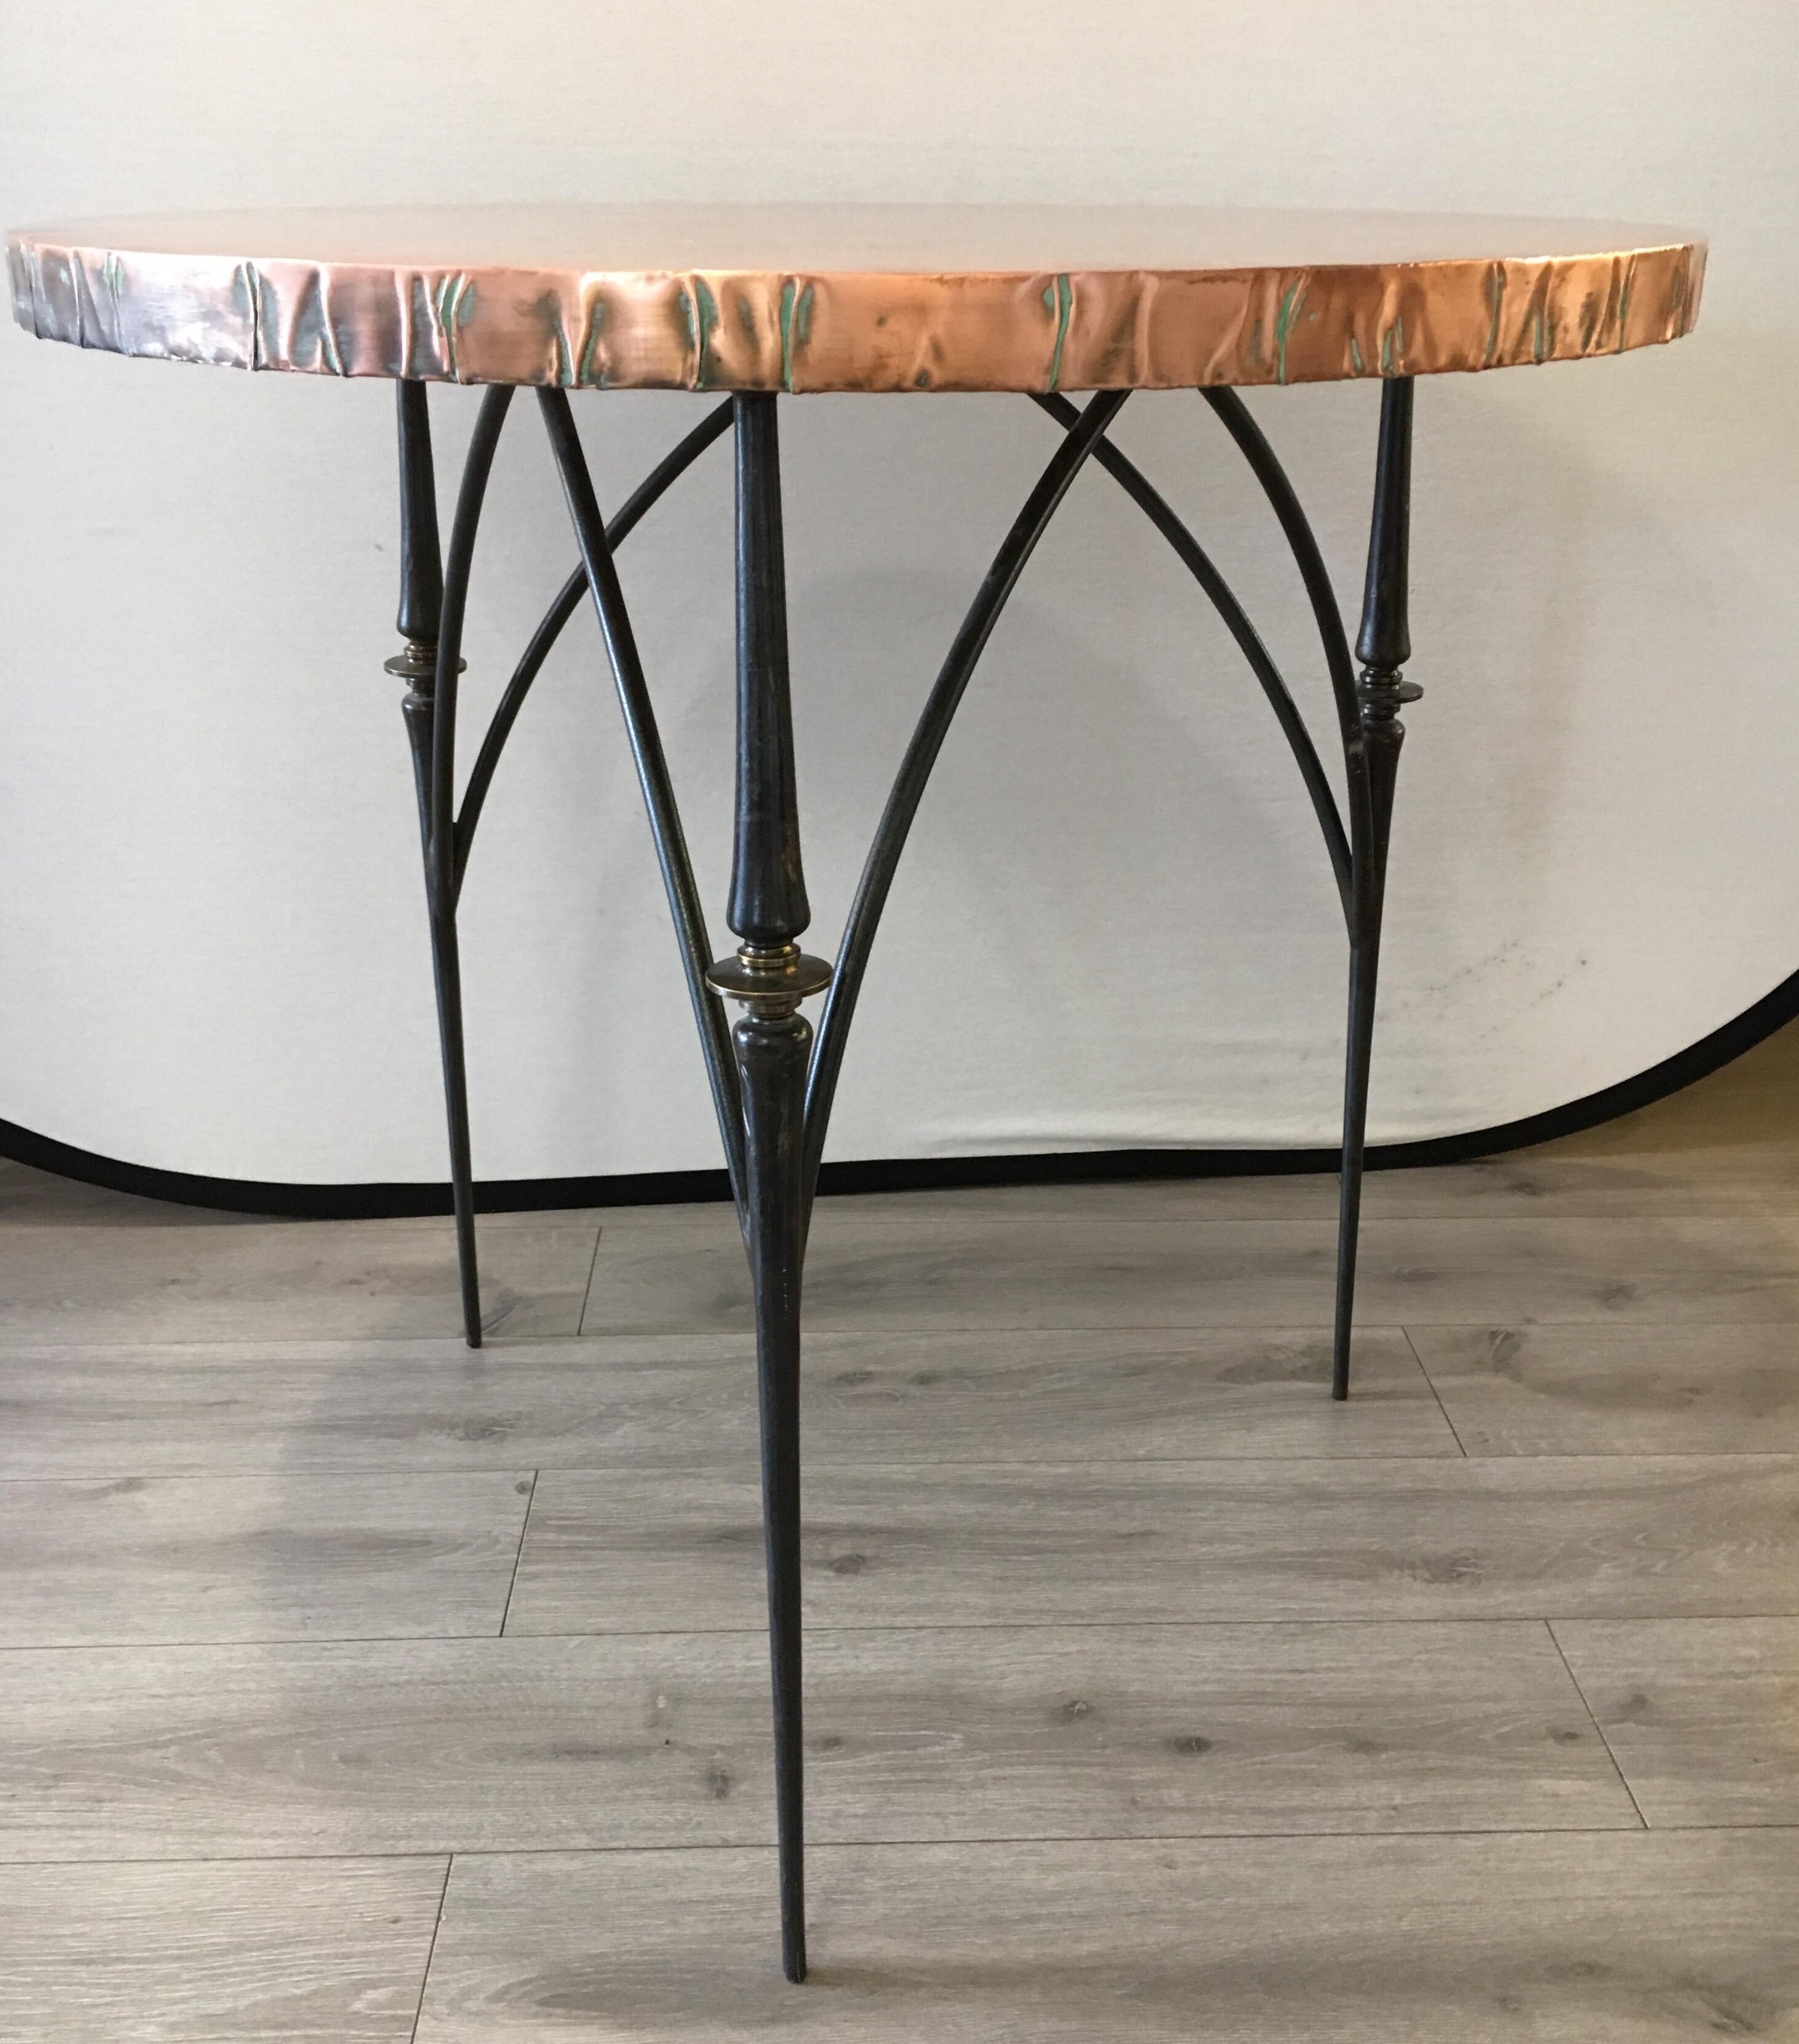 Bespoke set of five matching foyer or center tables that can also be used as a small dining tables. In the style of some of the best studio furniture of designers like Paul Evans, this piece has the elemental presence of a modern sculpture. From